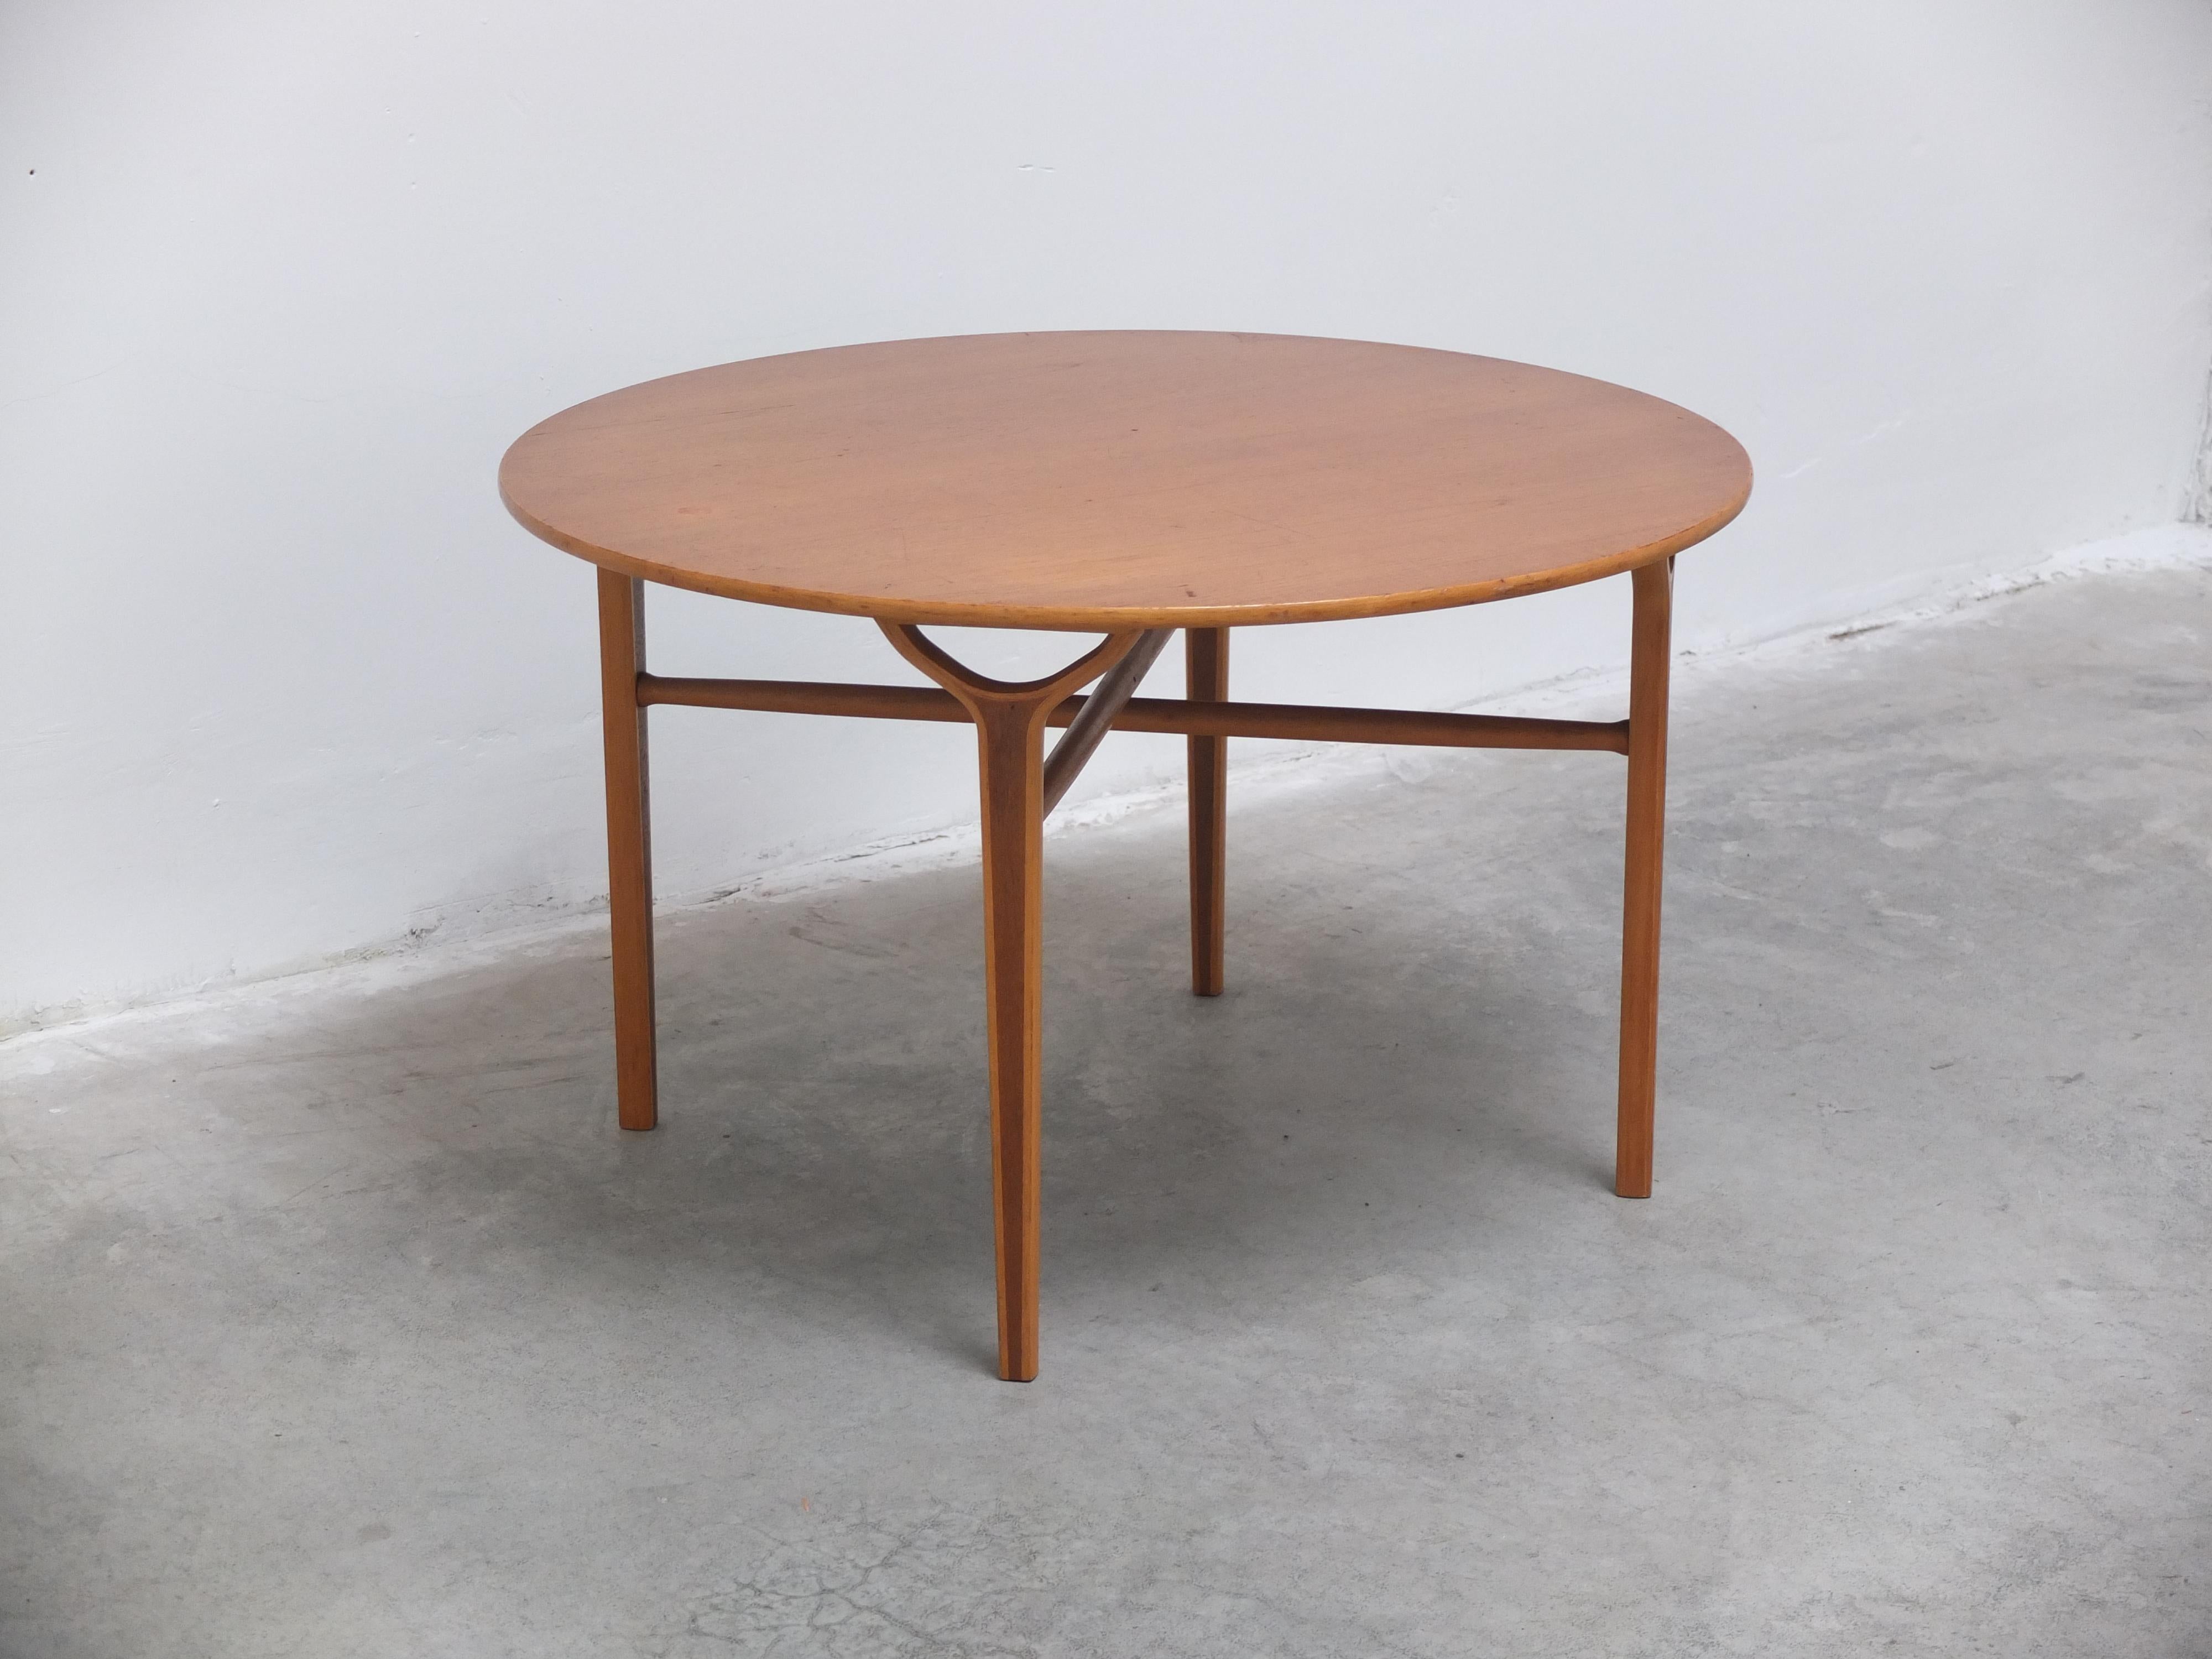 Danish Rare 'AX' Coffee Table by Peter Hvidt & Orla Mølgaard for Fritz Hansen, 1951 For Sale